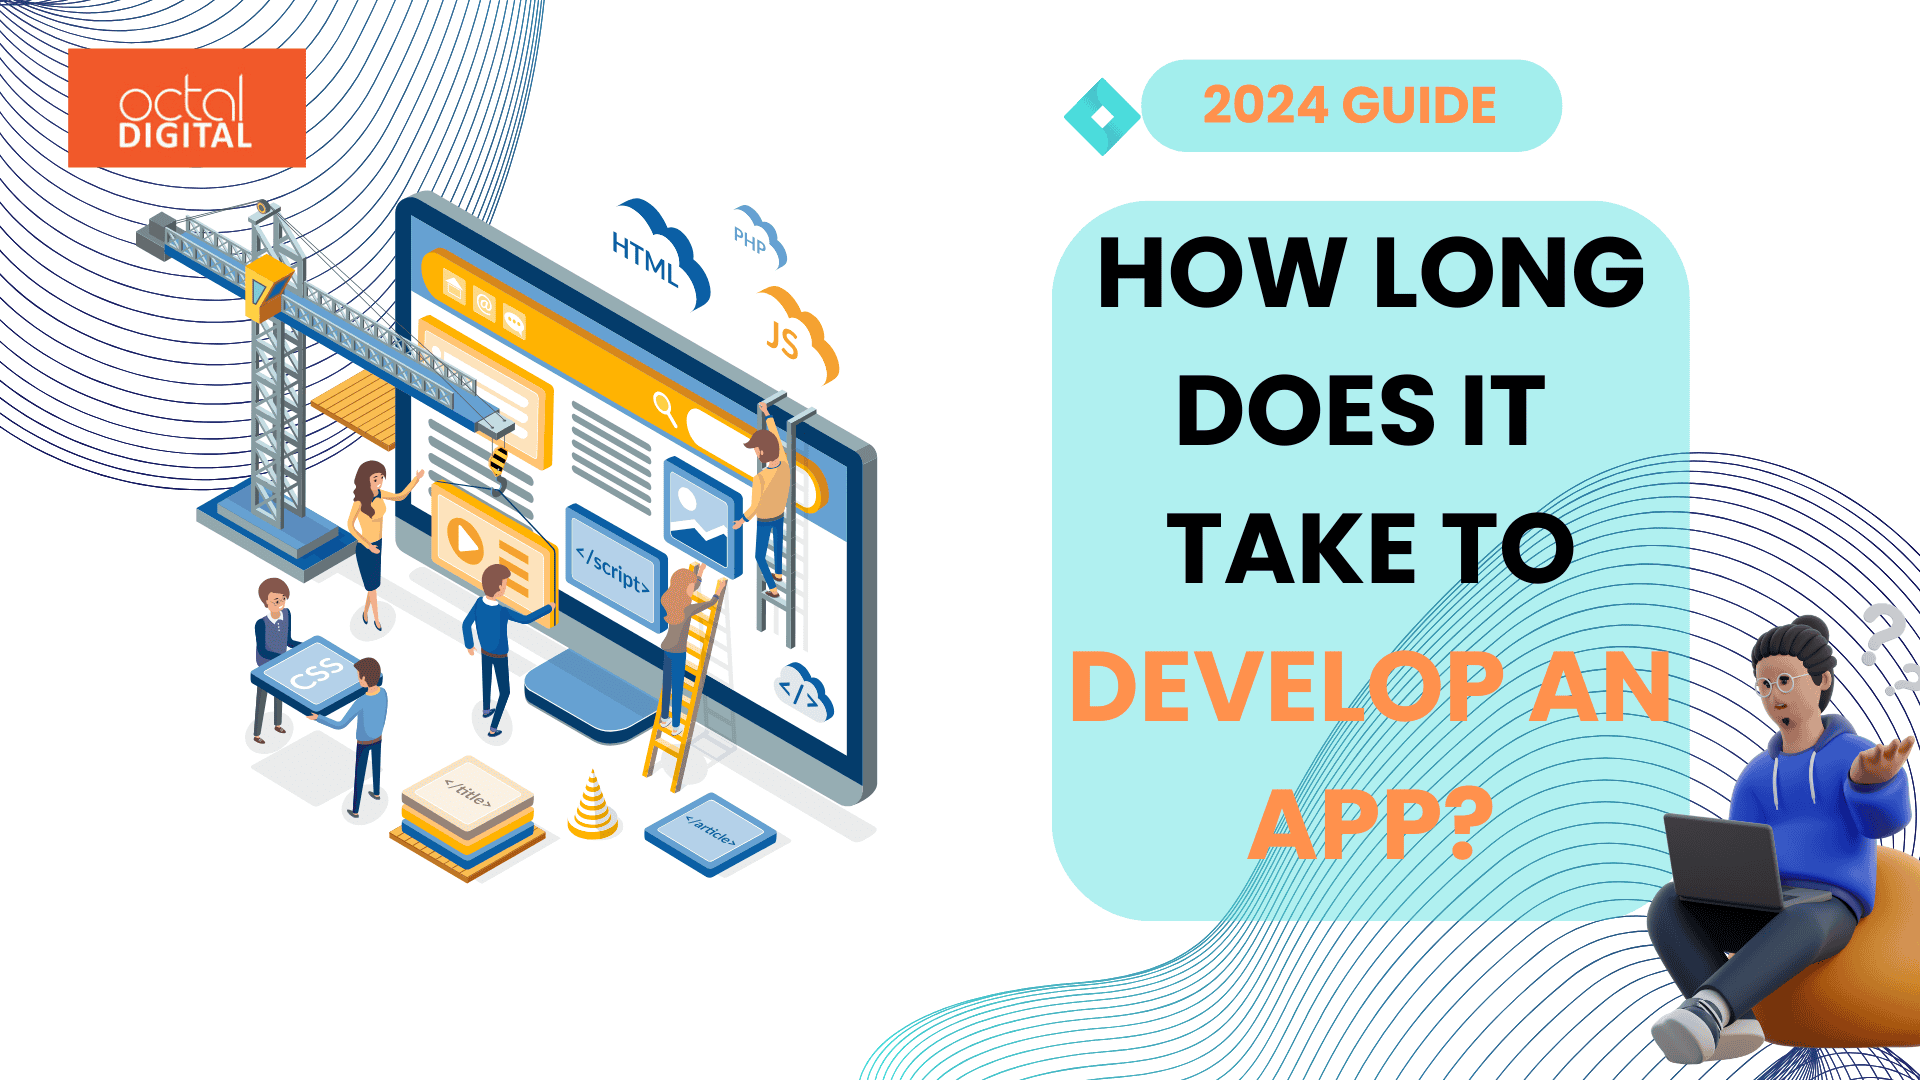 How Long Does it Take to Develop an App in 2024